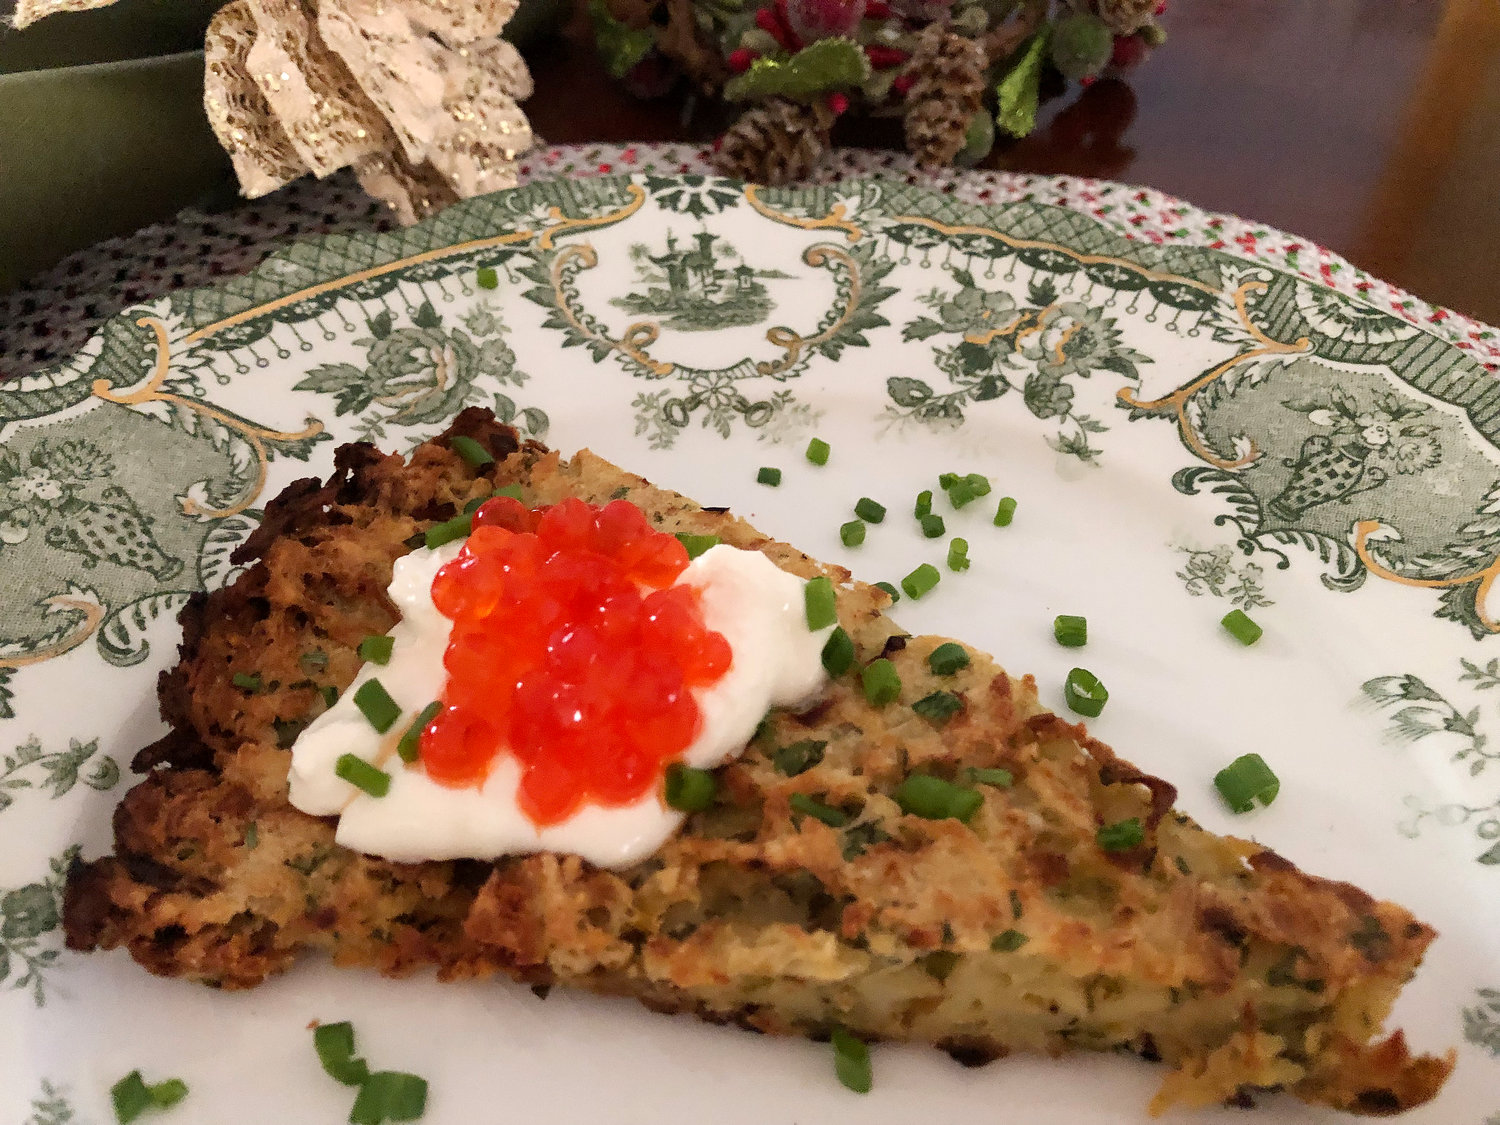 This easy-to-make skillet latke is topped by decadent dollops of crème fraîche and salmon caviar and a sprinkling of chives.